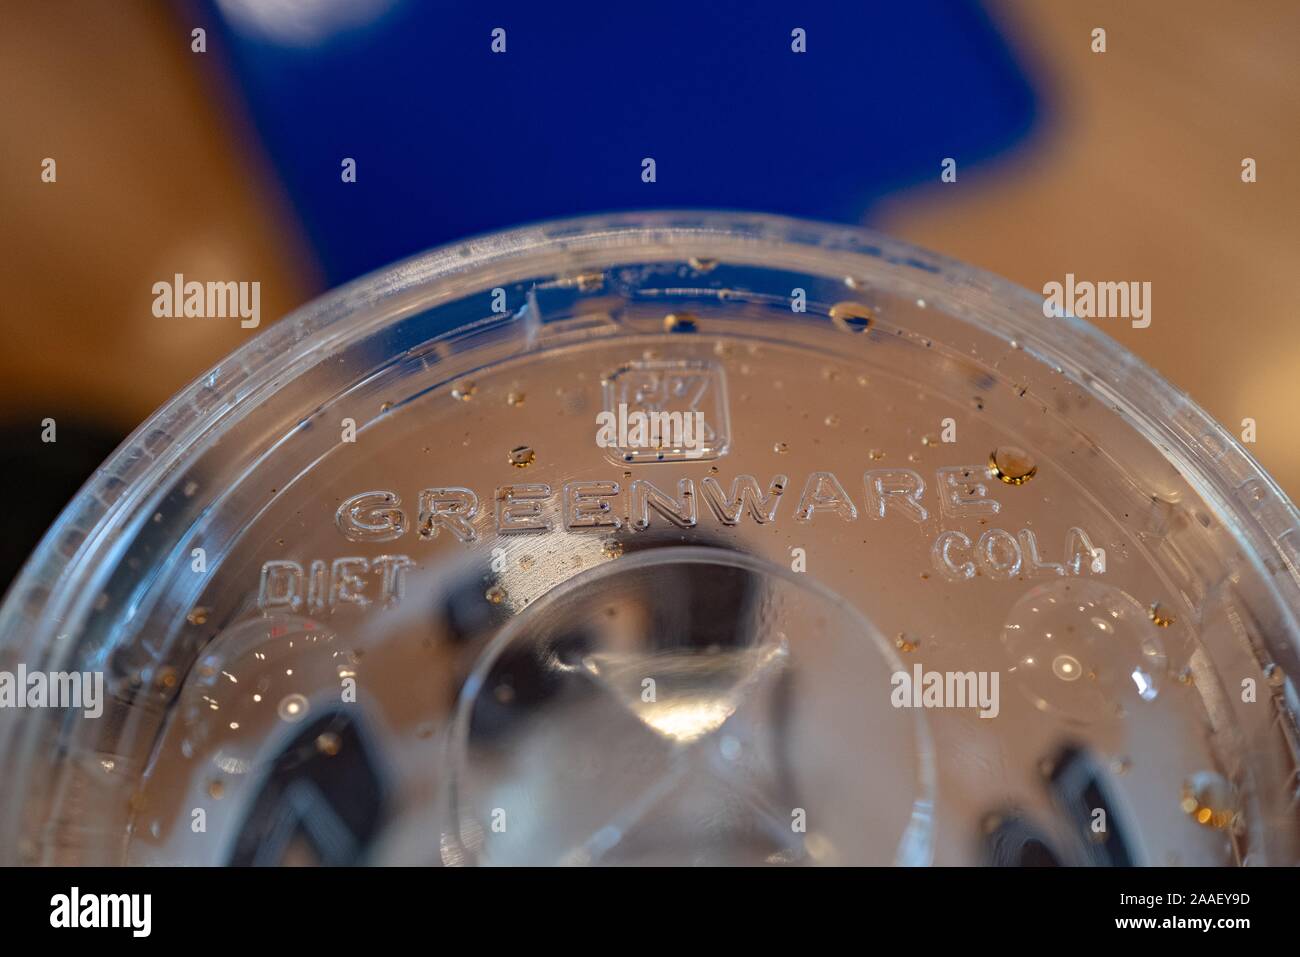 Close-up of logo for Greenware brand of compostable plastic restaurant serving ware on compostable plastic cup, a division of parent company Fabri-Kal, Walnut Creek, California, August 28, 2019. () Stock Photo